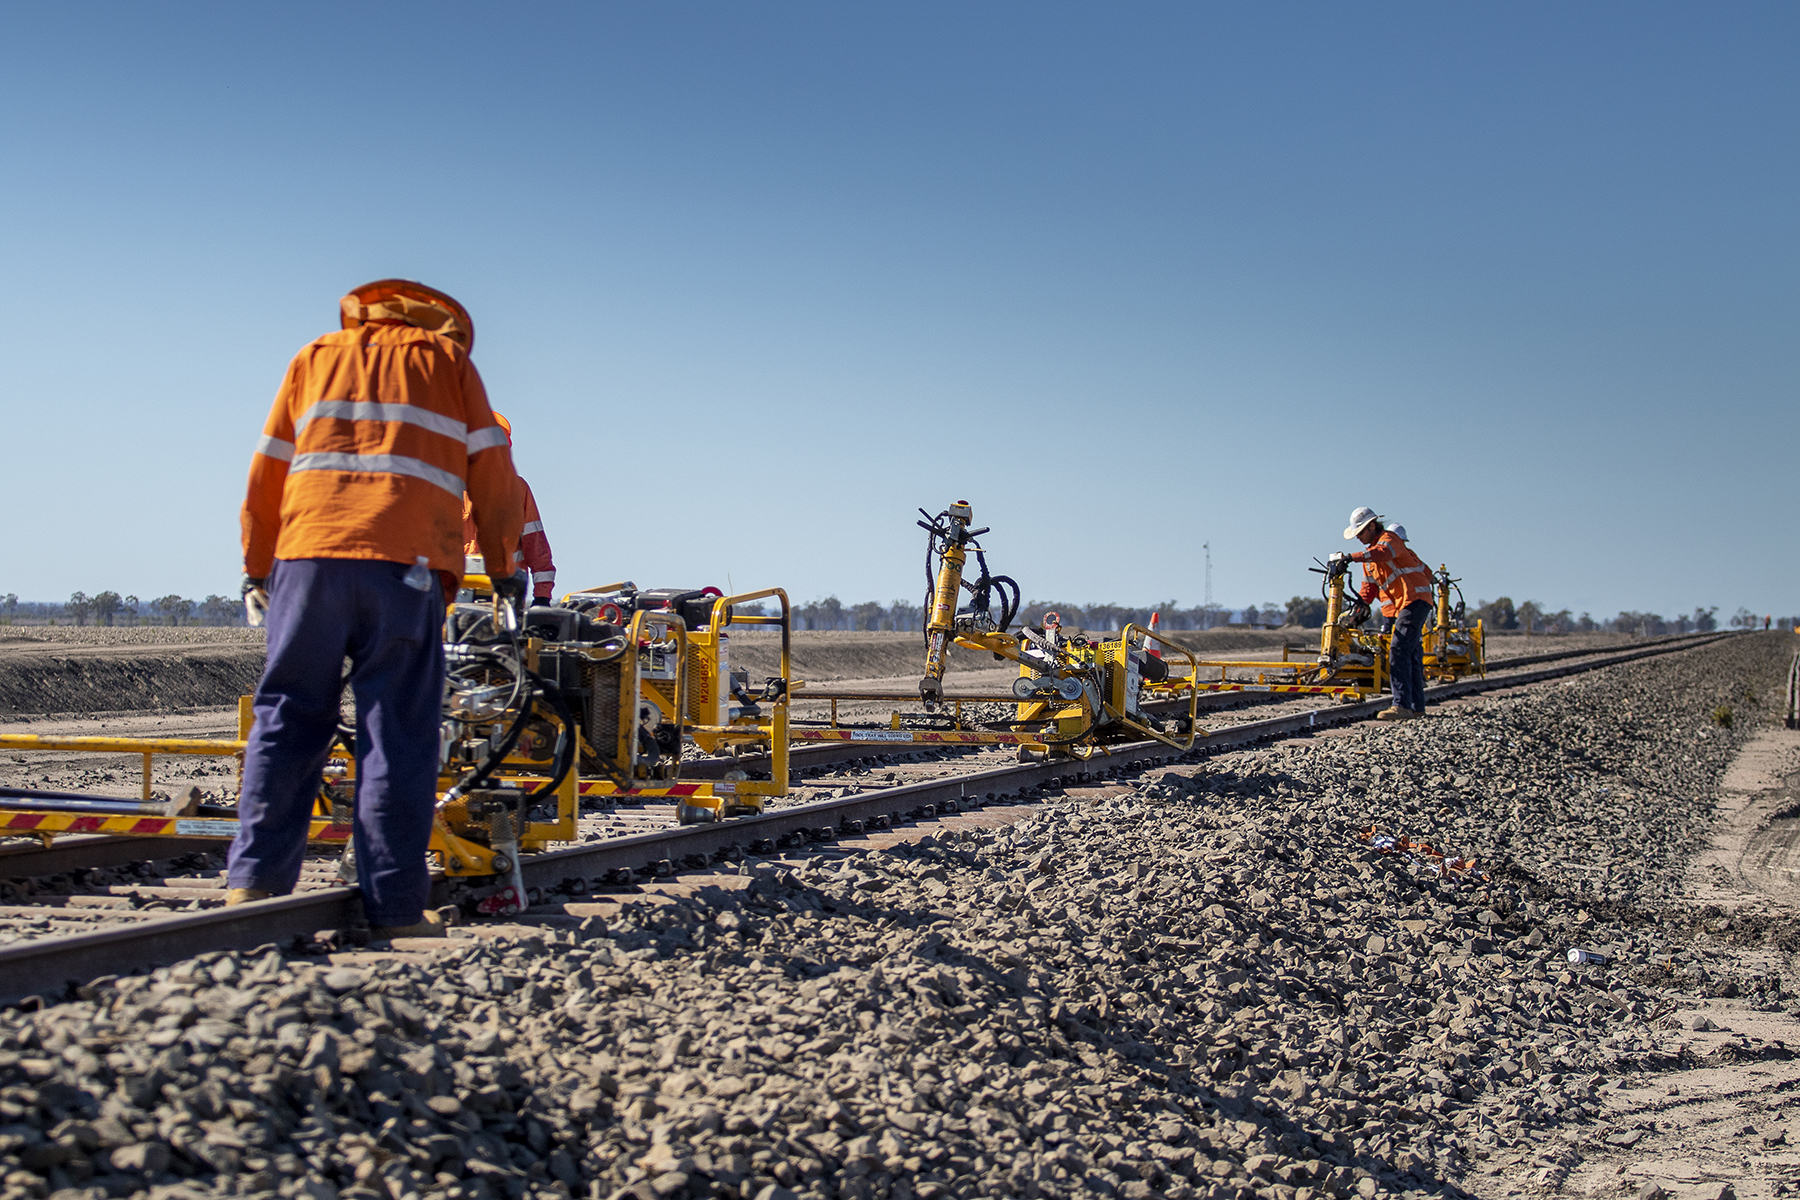 Major construction on Narrabri to North Star Phase 1 Project is well underway